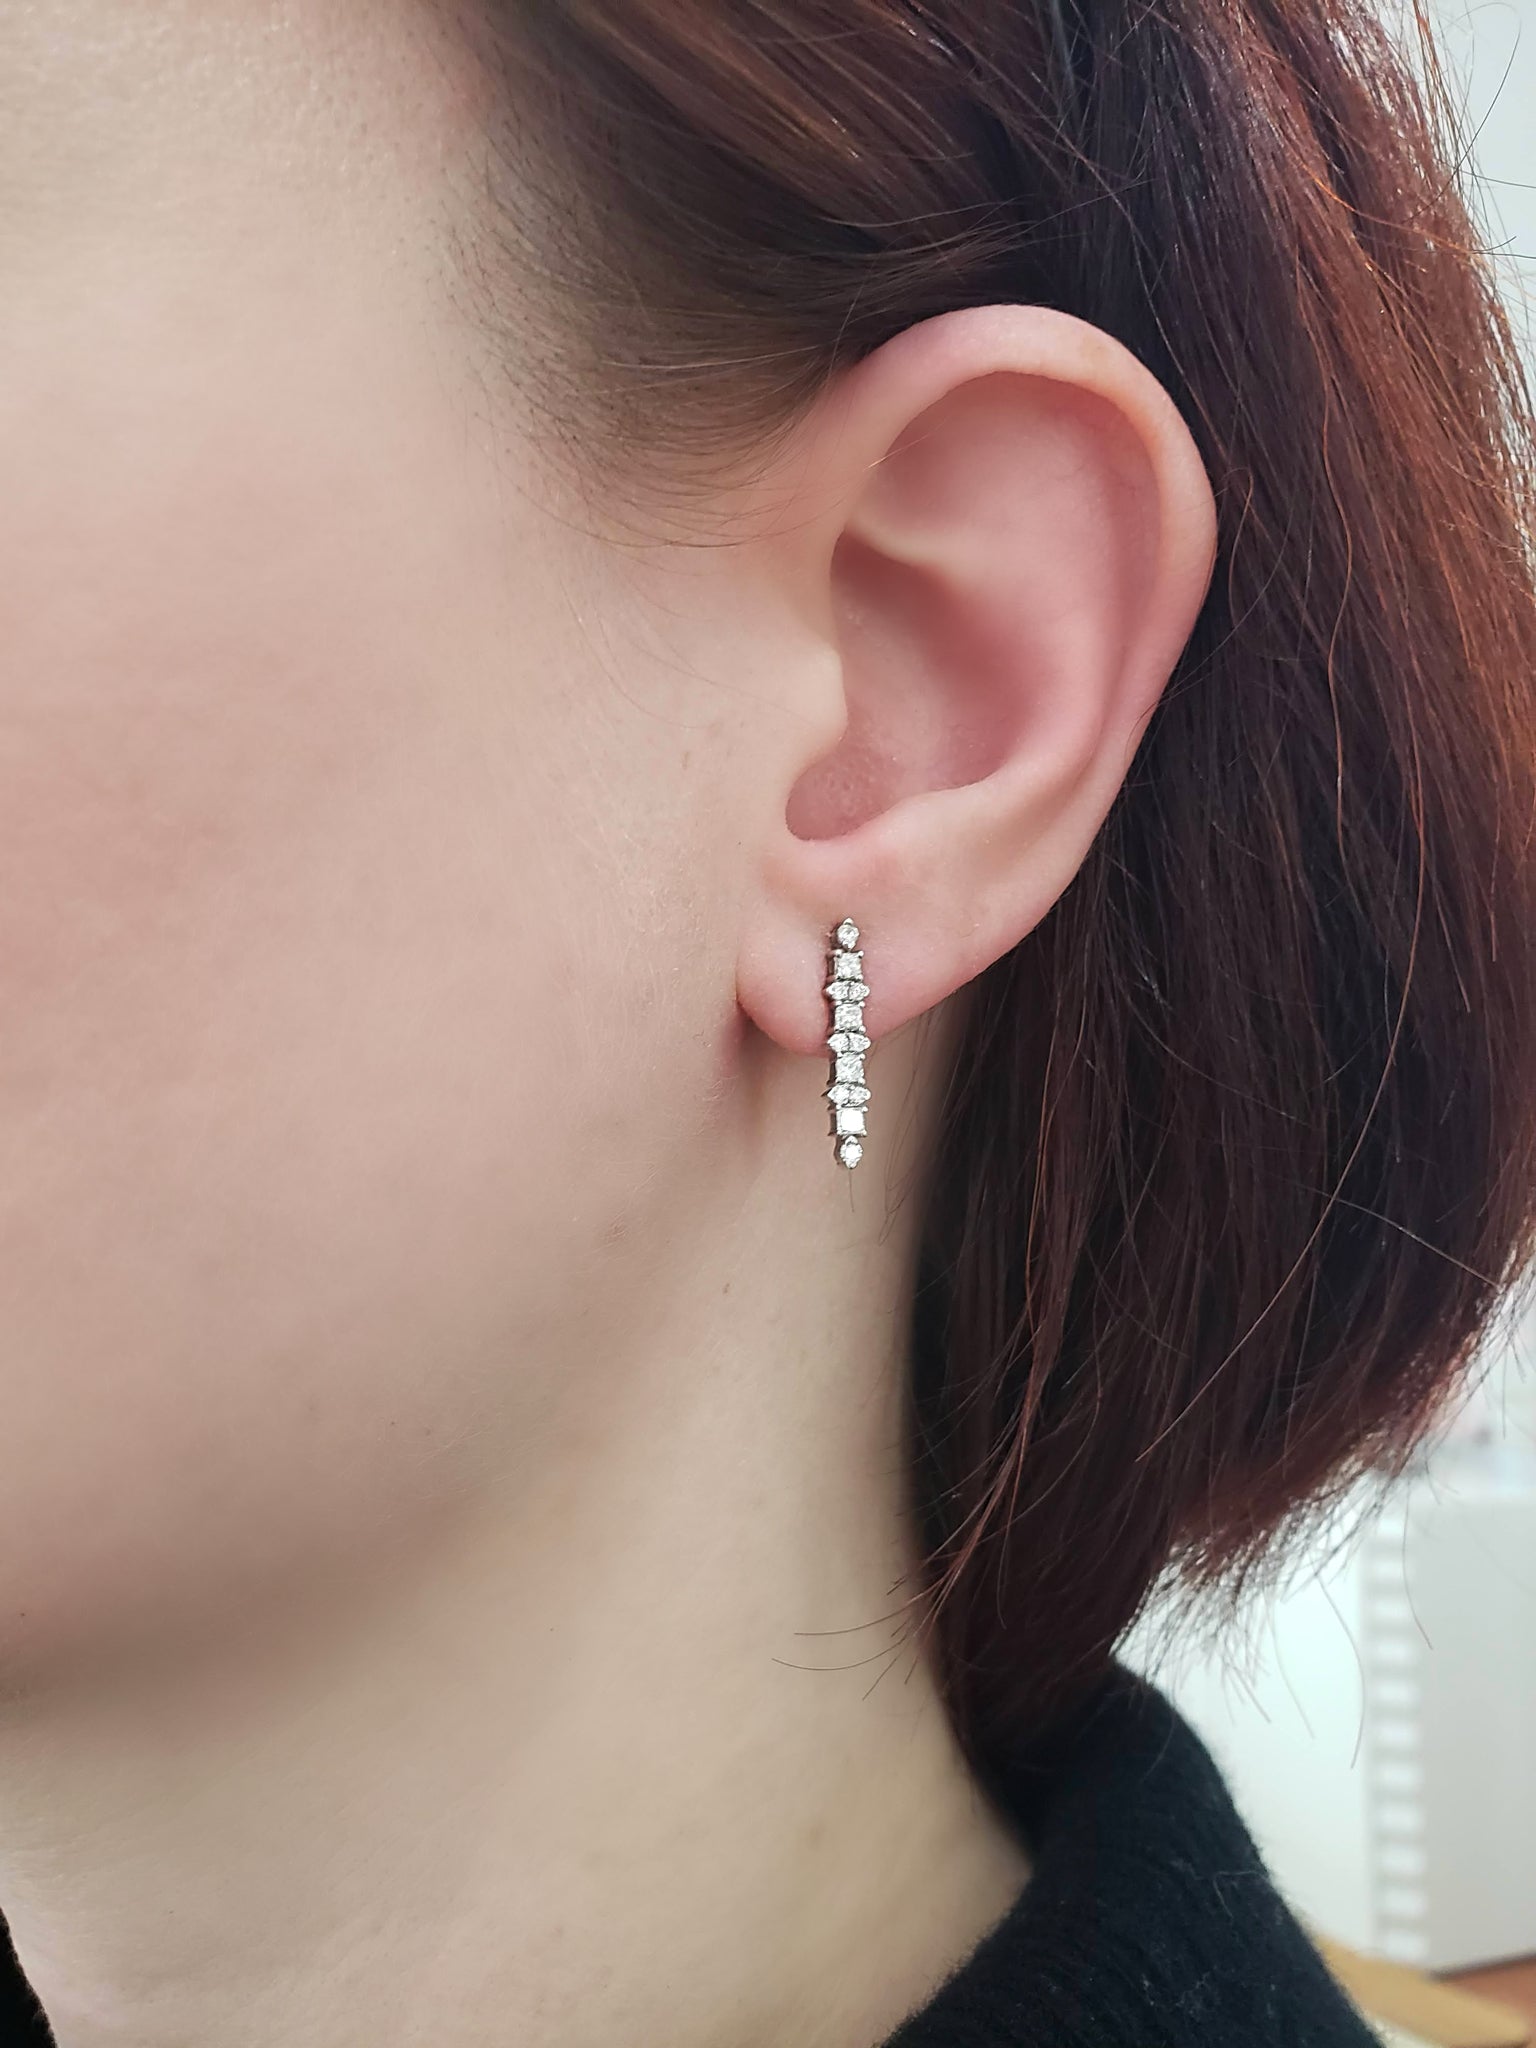 Diamond and Gold Earrings